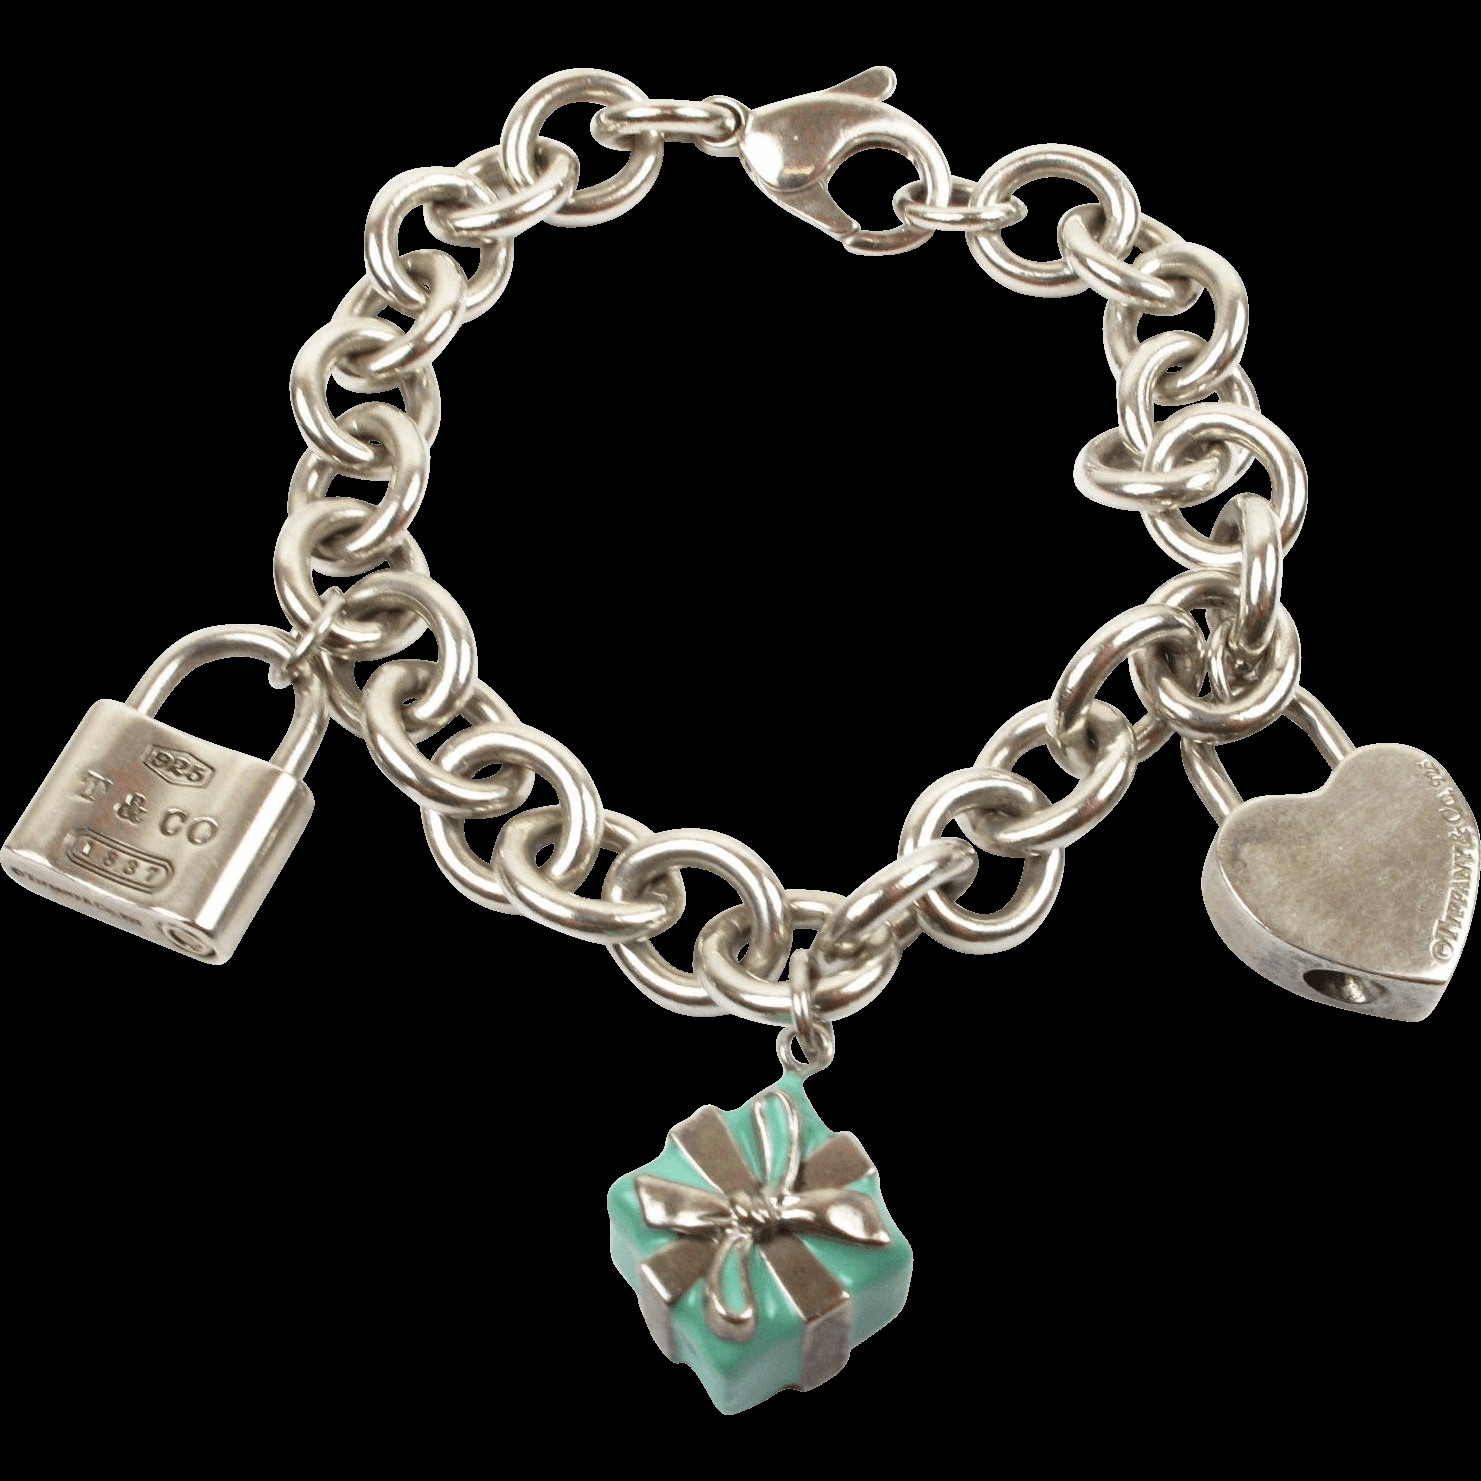 Tiffany Sterling Silver Bracelet
 Authentic Tiffany & Co Sterling Silver Charm Bracelet with